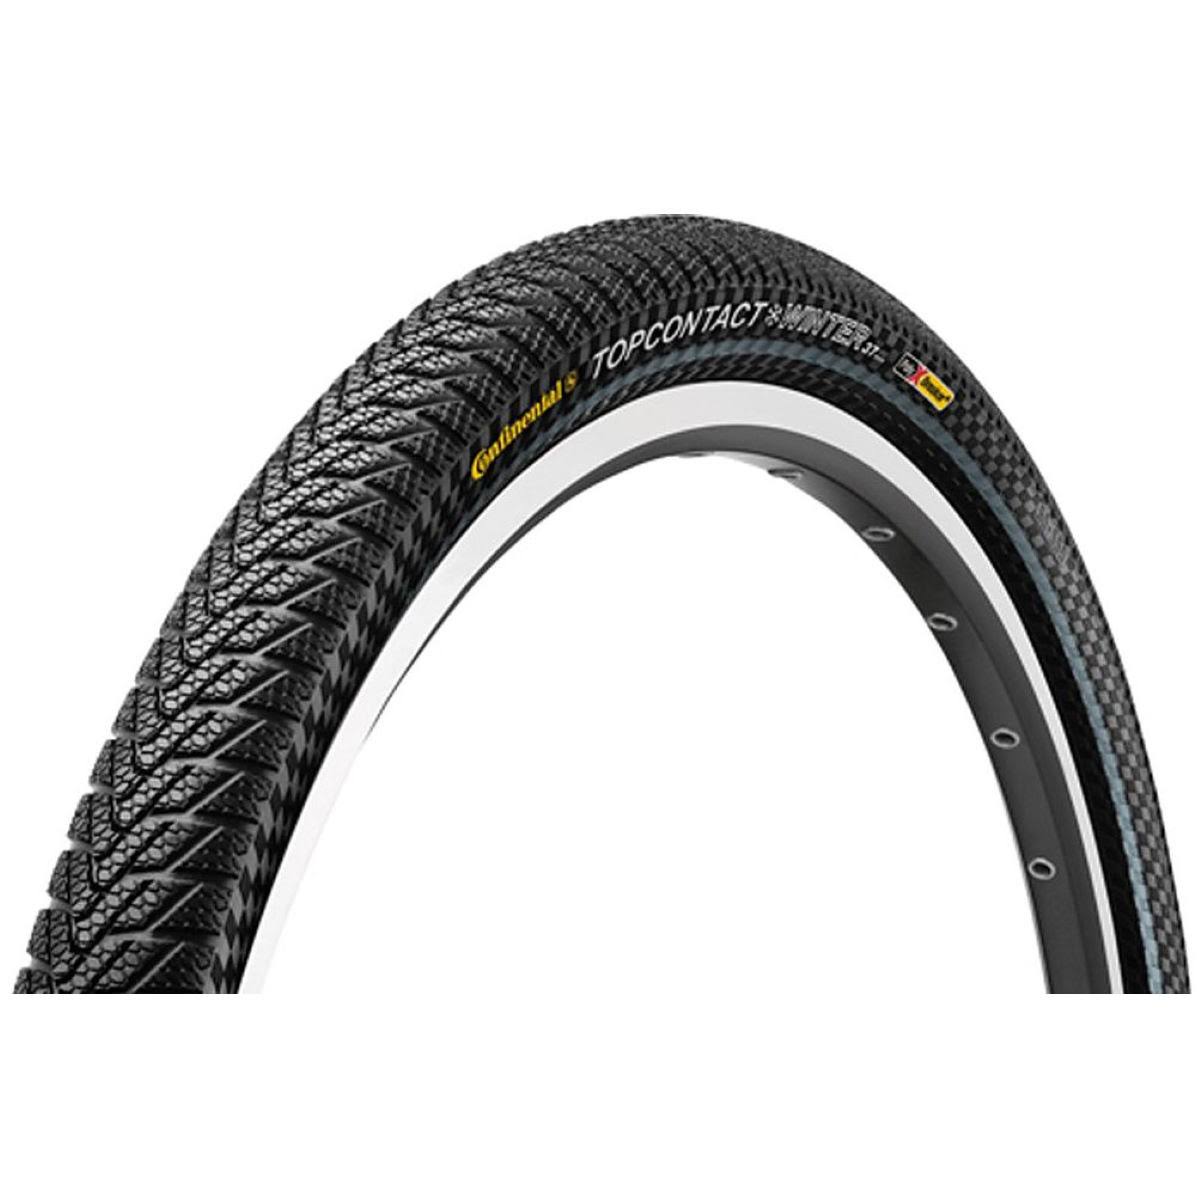 Continental Top Contact Winter II Bicycle Tire - 26" x 2"